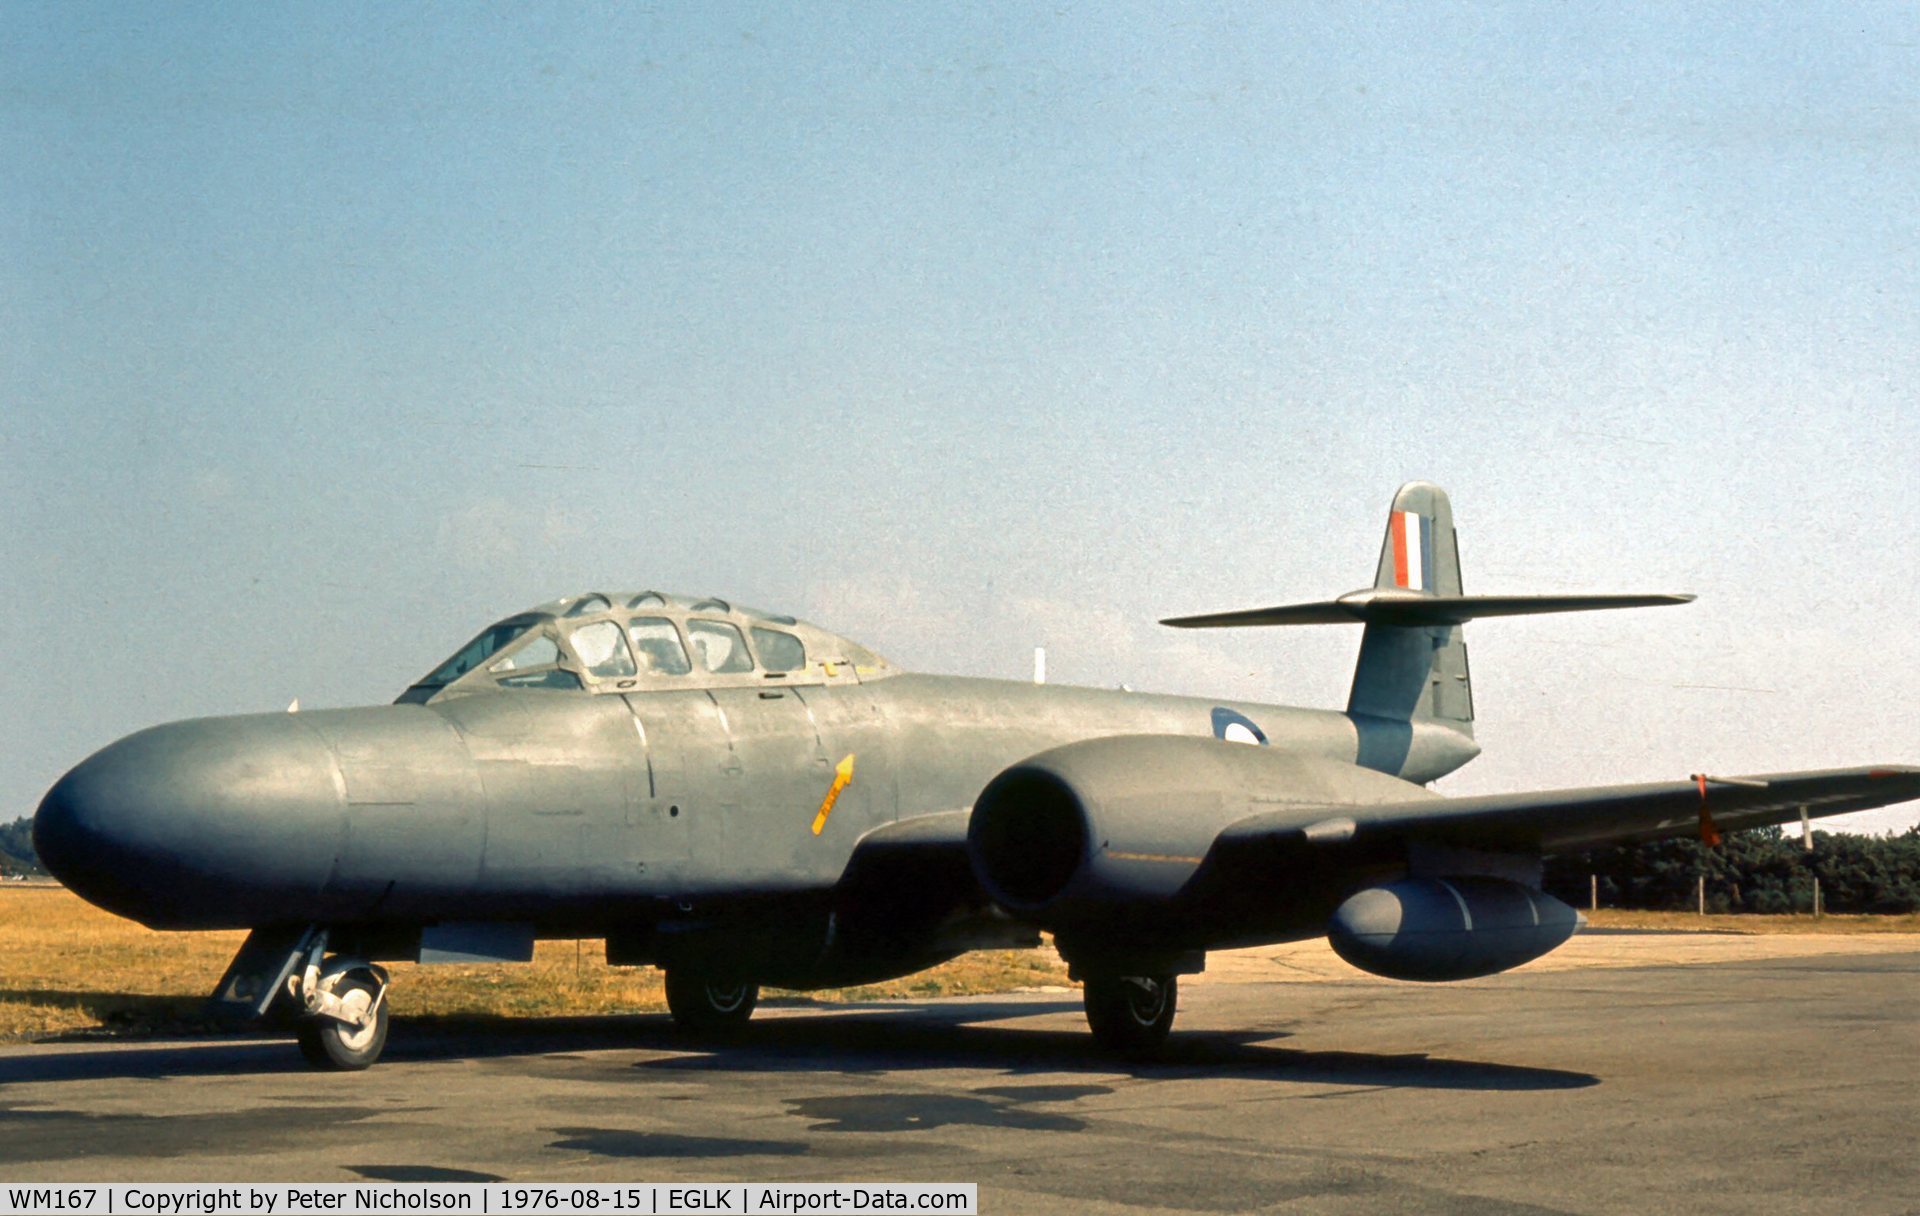 WM167, 1952 Gloster Meteor TT.20 C/N S4/U/2342, Now flown as NF.11, this Meteor TT.20 was seen at the Blackbushe Fly-In in the Summer of 1976.